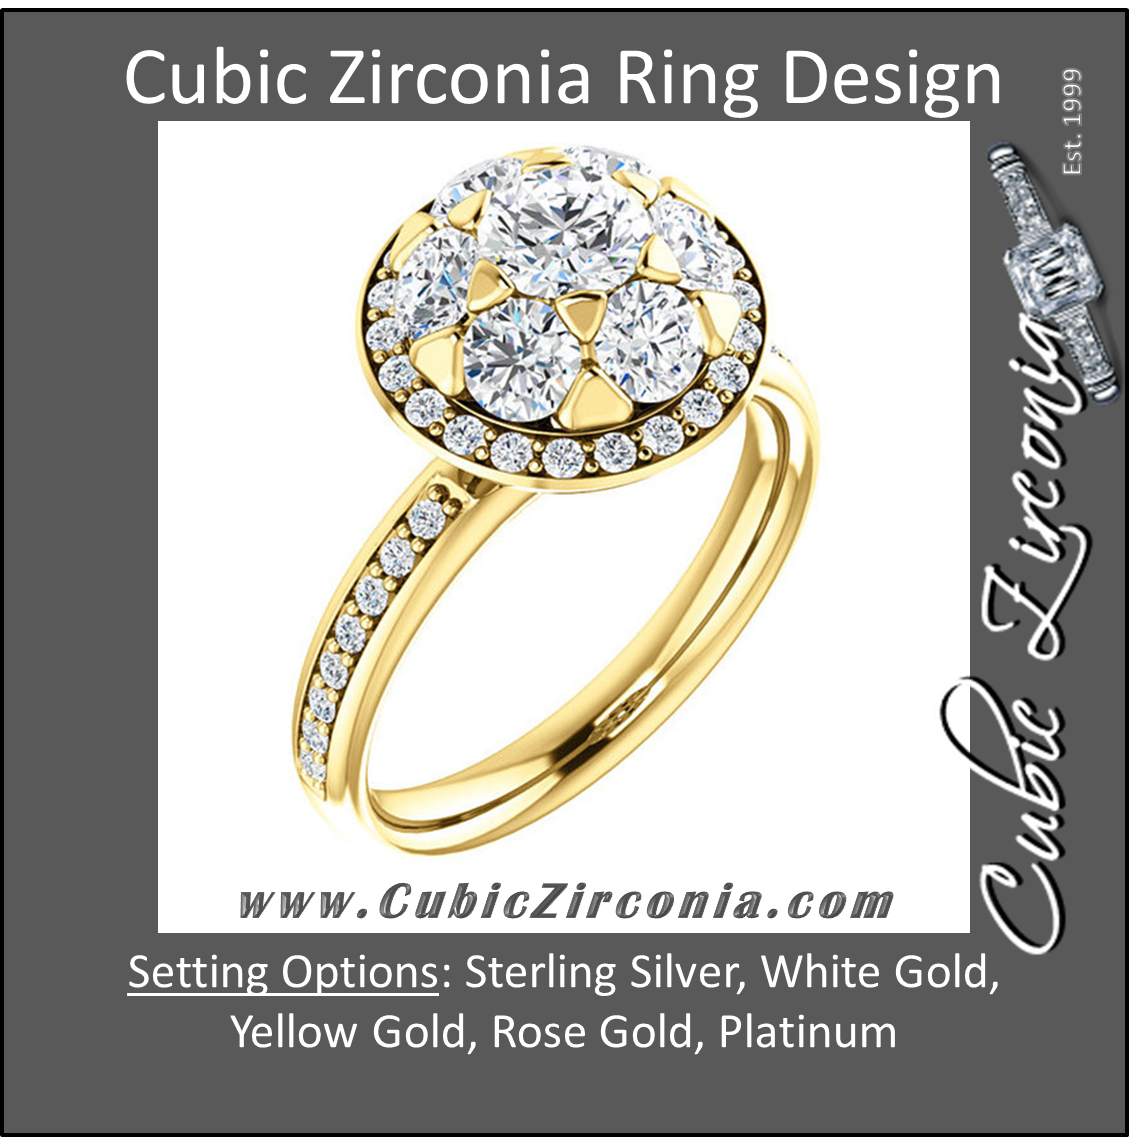 Cubic Zirconia Engagement Ring- The Janelle (Floral-Inspired Round Halo)